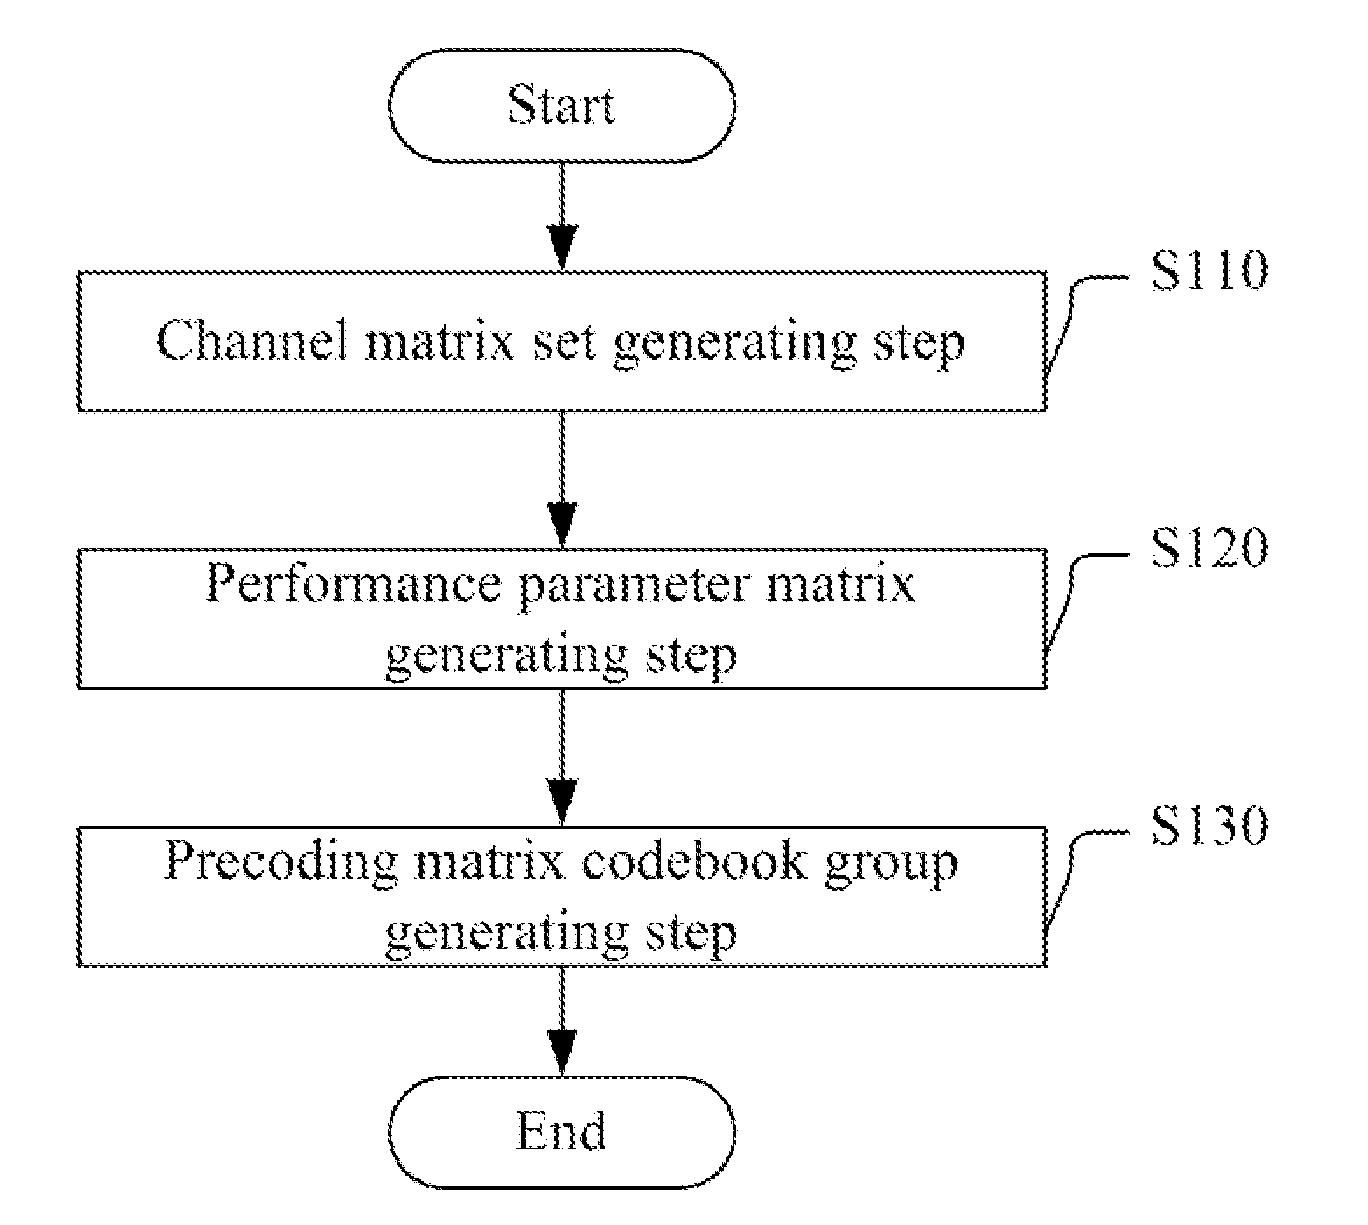 Method and apparatus for generating a precoding matrix codebook group